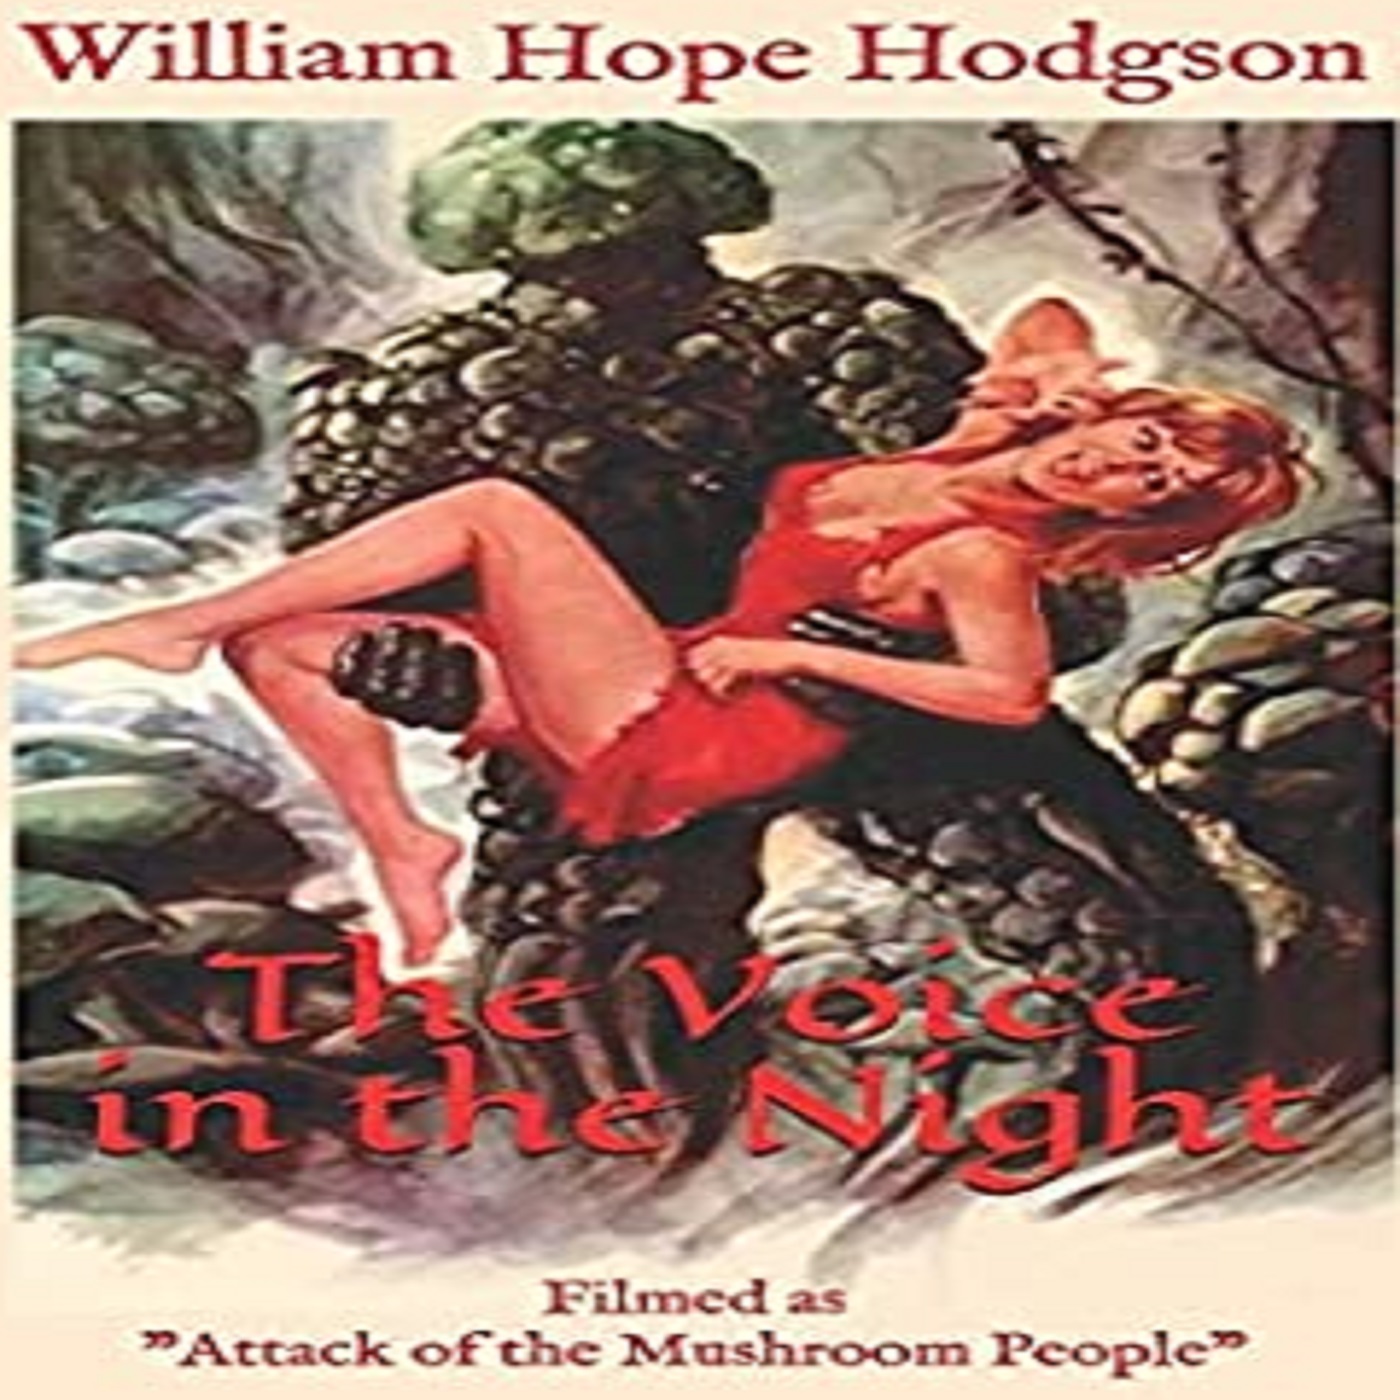 Kenny Kappa’s Kaiju Krypt Presents: ‘The Voice in the Night’ by William Hope Hodgson (Read by Dr. Dante Dourif)